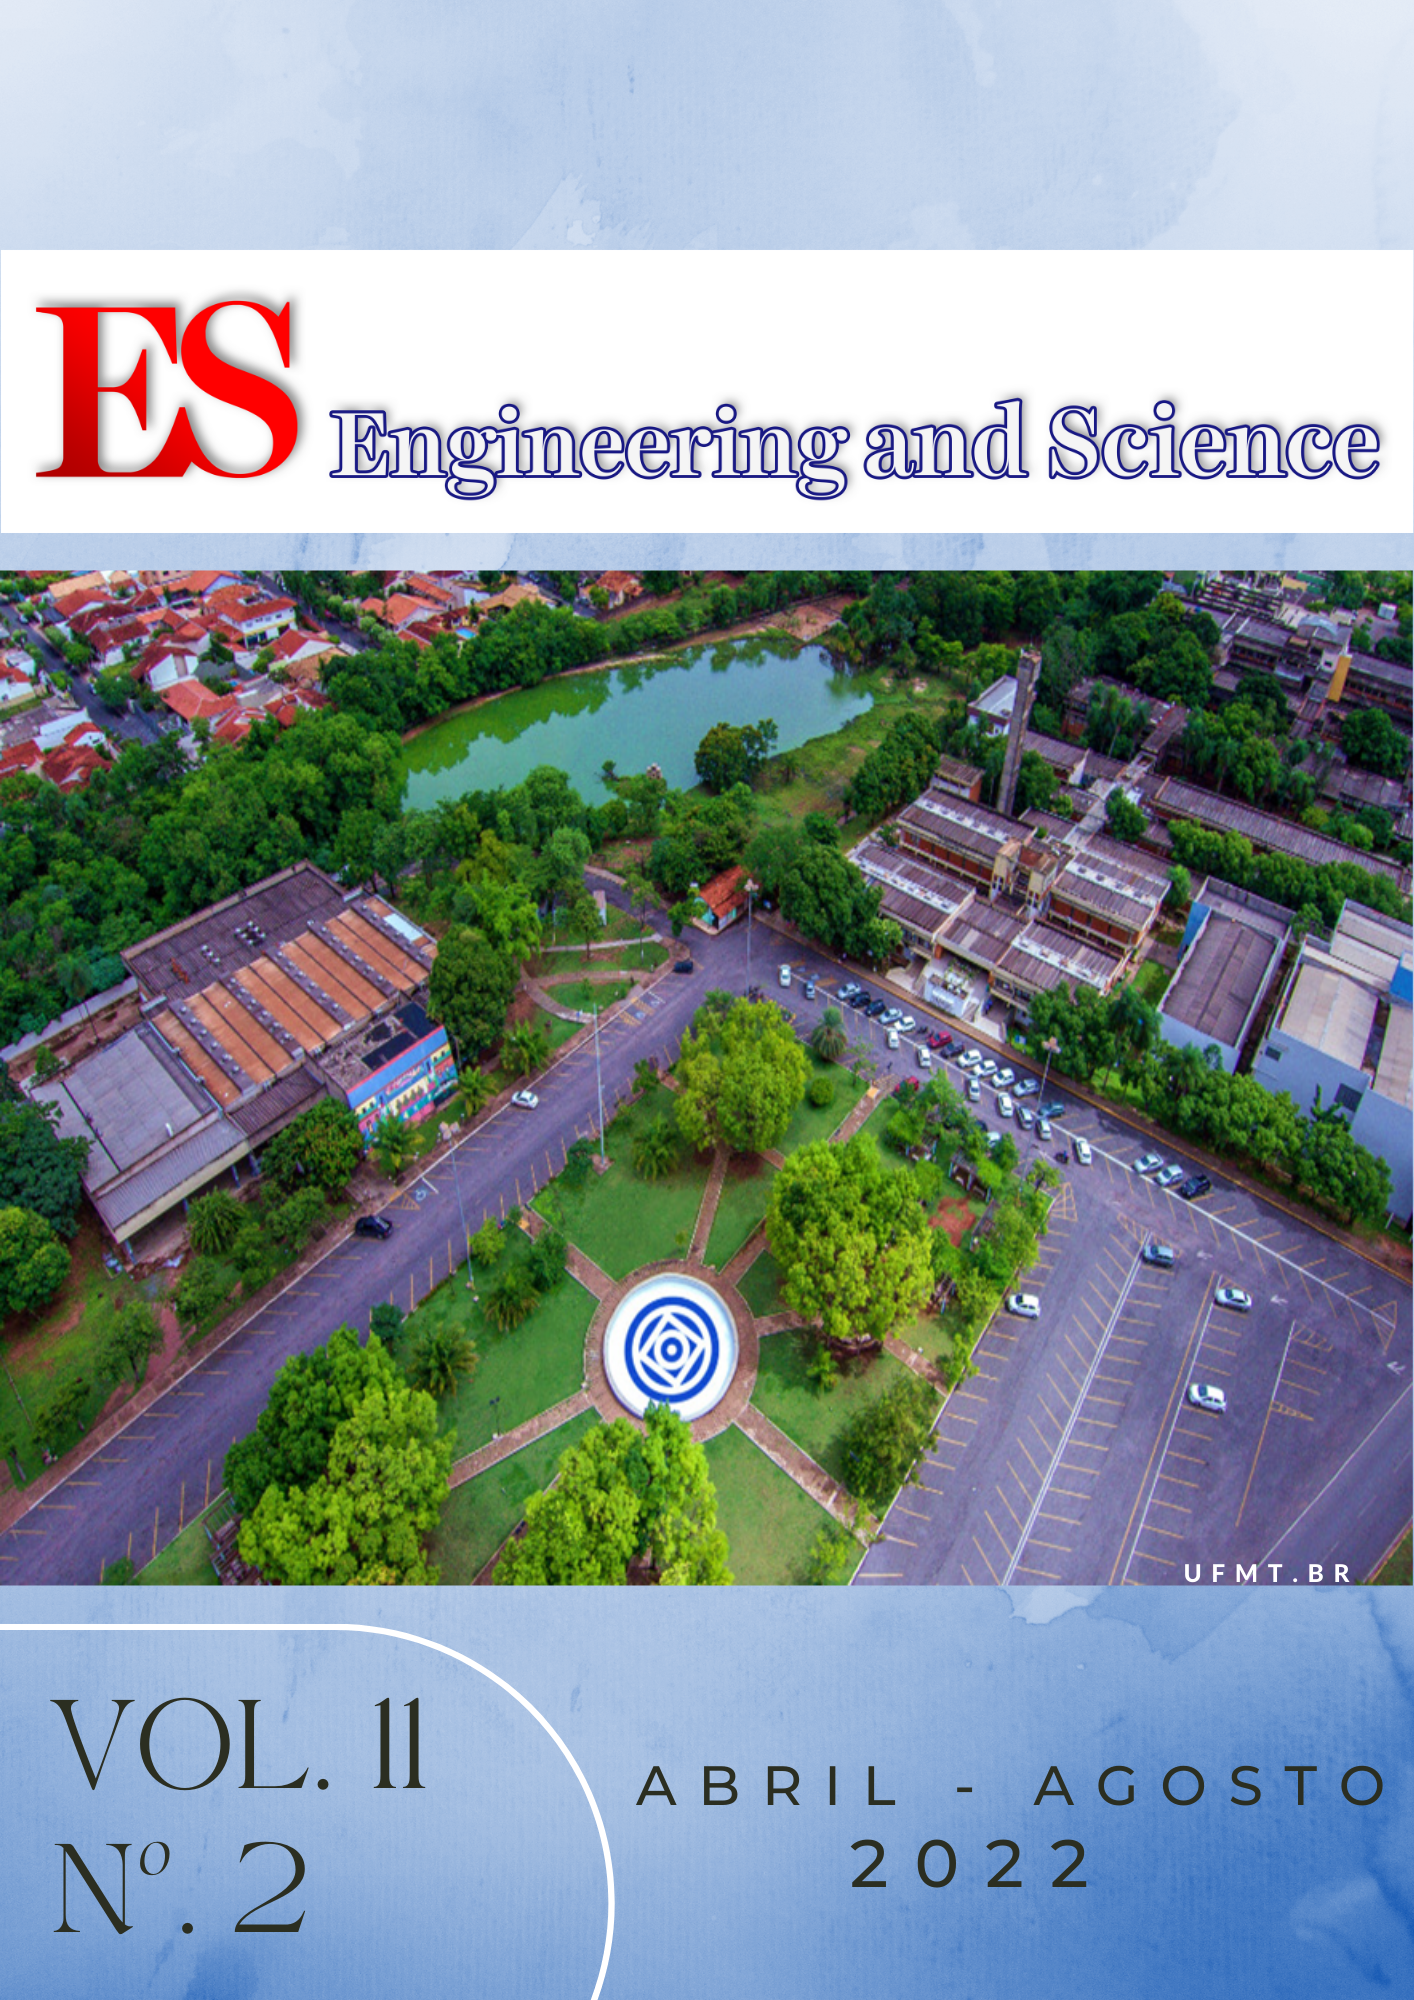 					Visualizar v. 11 n. 2 (2022): E&S Engineering and Science| Abril - Agosto (2022)
				